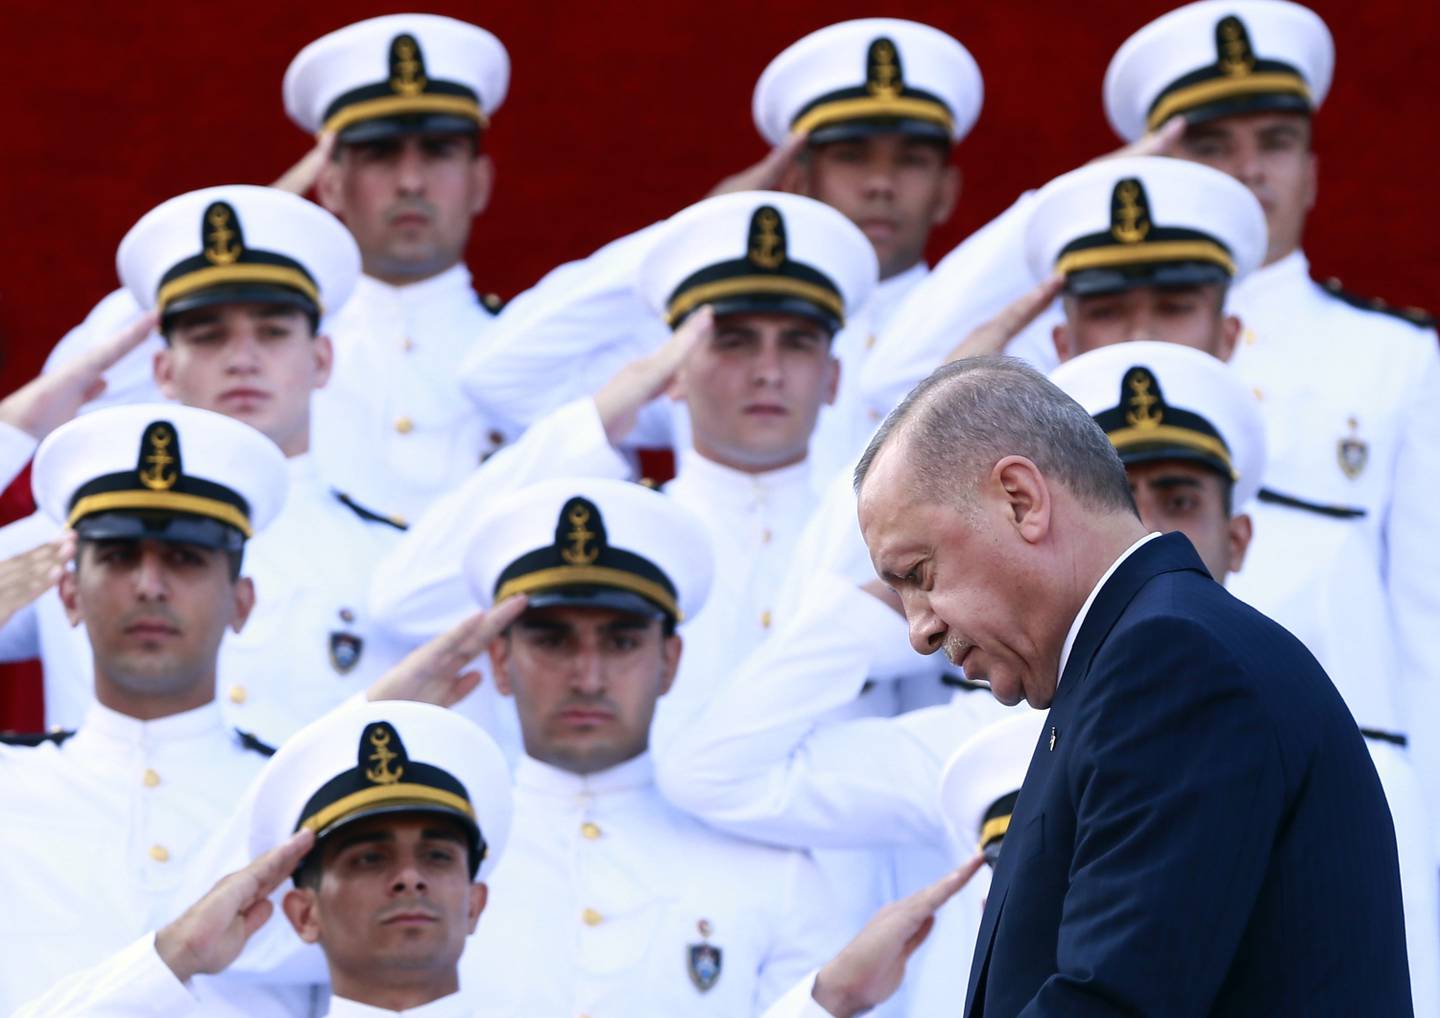 Turkey's President Recep Tayyip Erdogan, arrives to deliver a speech to graduates of a military academy in Istanbul, Saturday, Aug. 31, 2019.